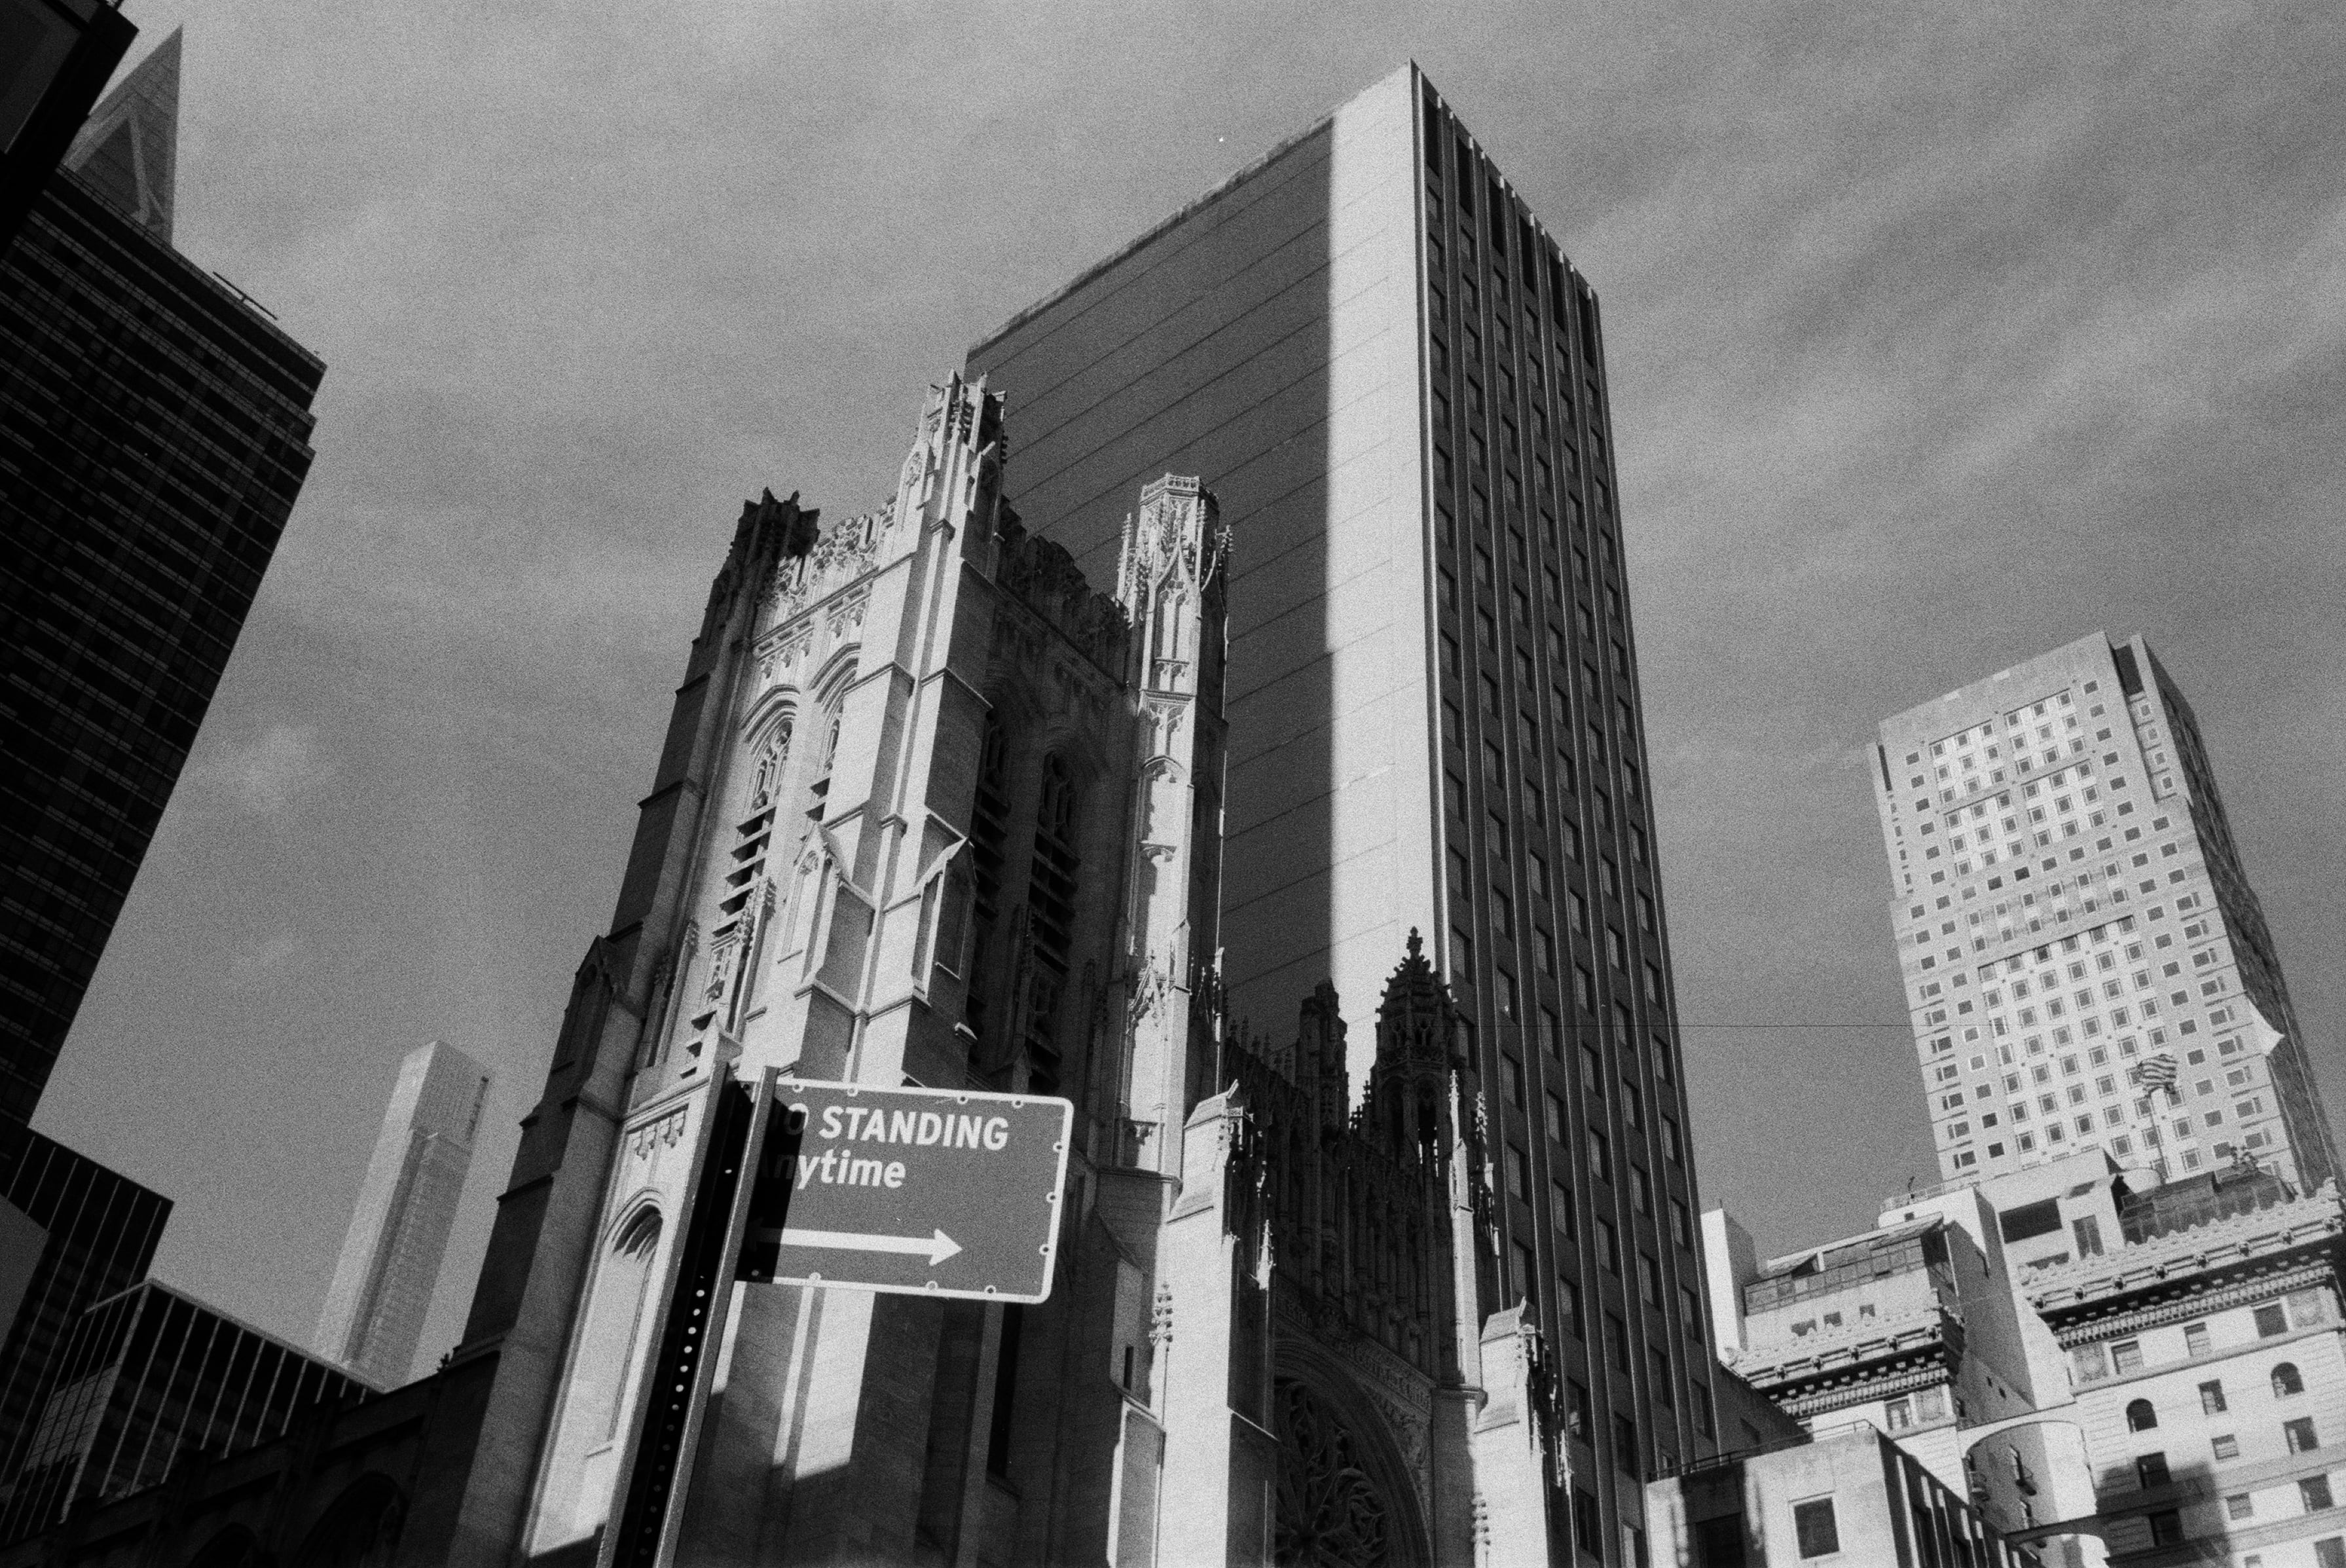 A black and white photo of a New York City landscape. The subject of the photo is a historic catherdral that is having hard light cast on it by a modern skyscraper that towers behind it.